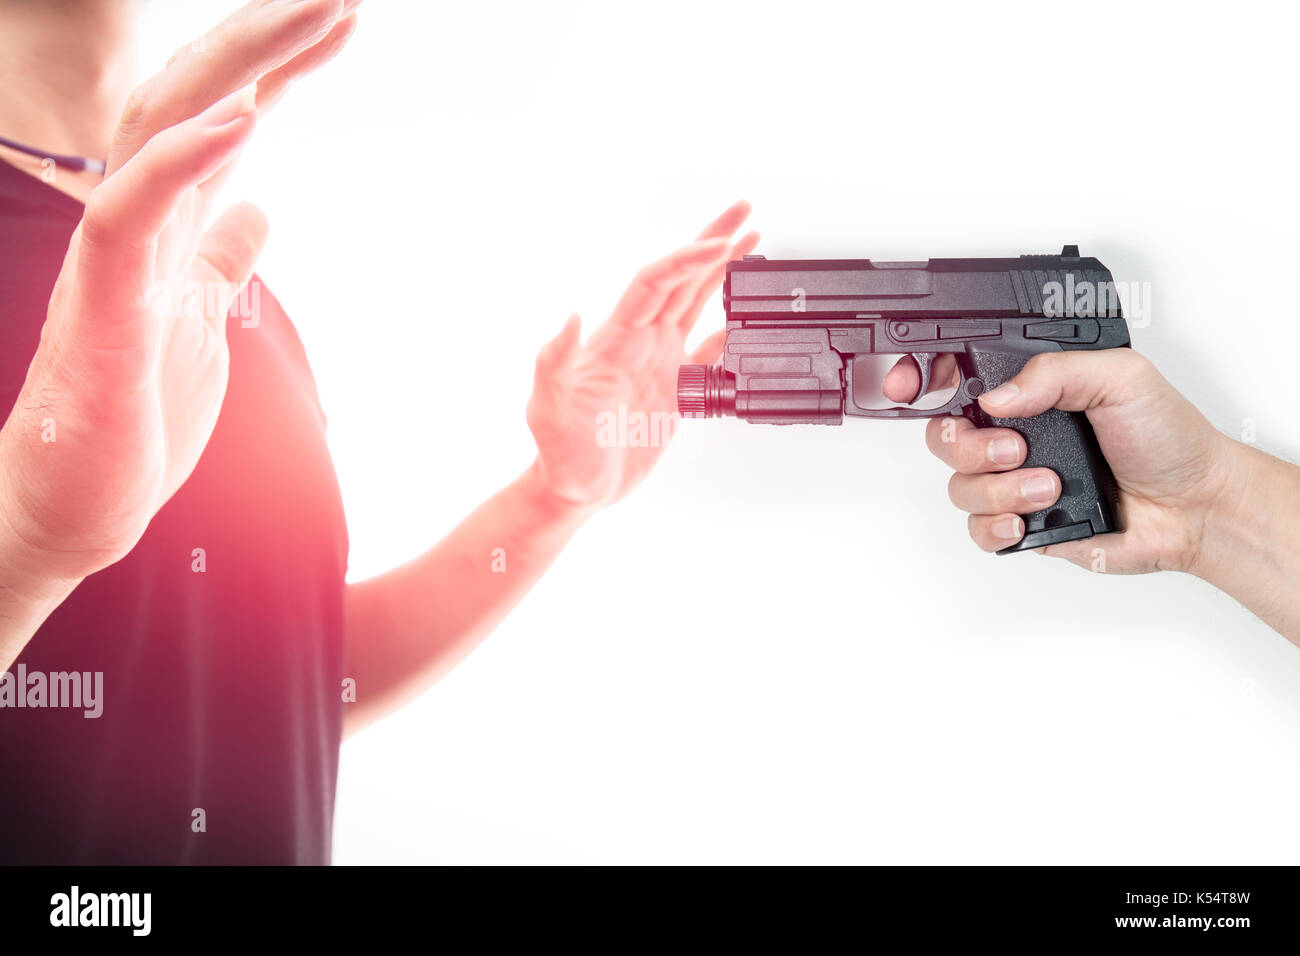 Robber with a gun robbing intimidate a man surrender. Isolated white background. Bandit steals from the male. Concept of robbery. Stock Photo